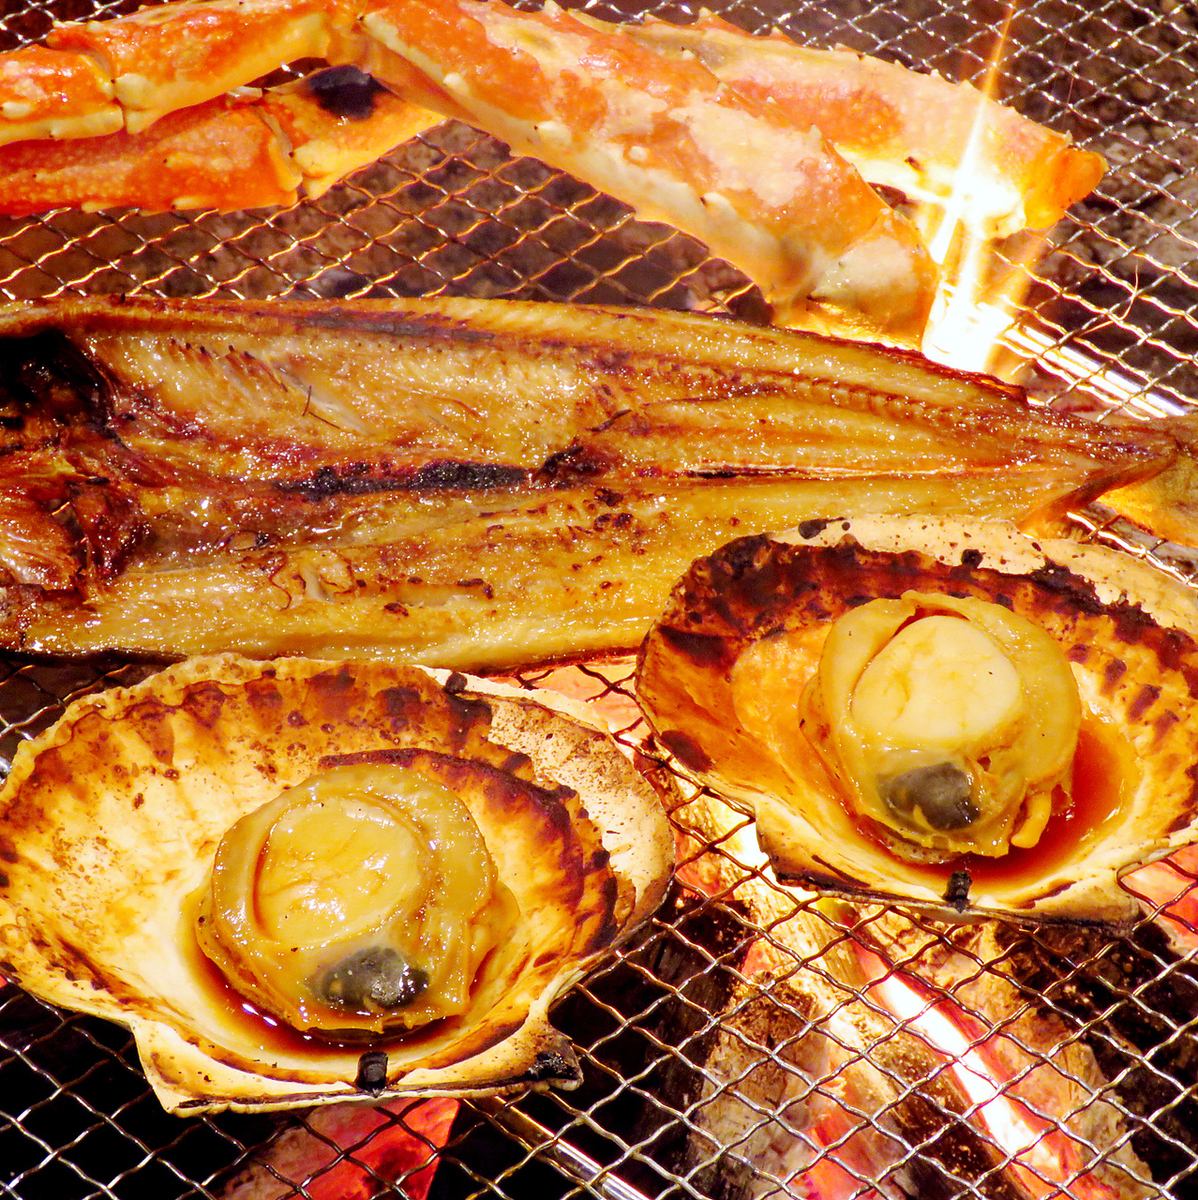 The seasonal seafood that you can enjoy with a lively Robatabe is excellent!